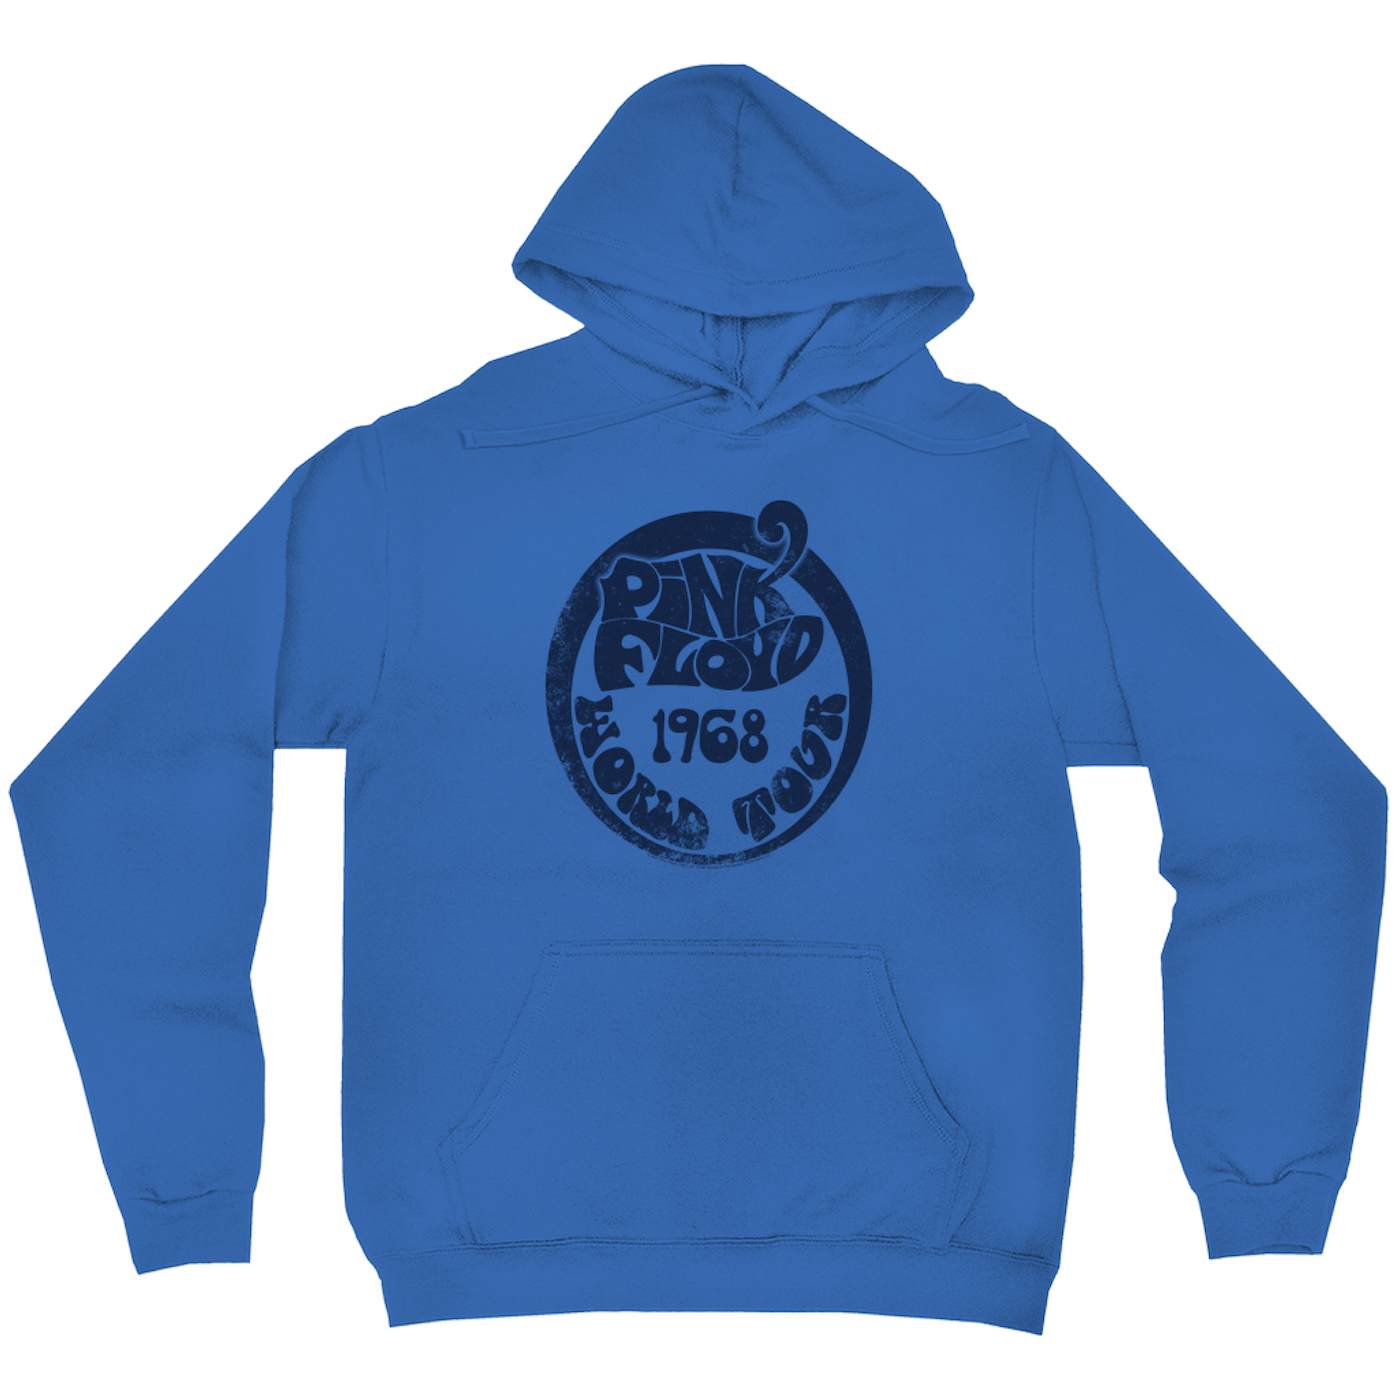 Pro Standard Blue/Pink Boston Red Sox Ombre Pullover Hoodie